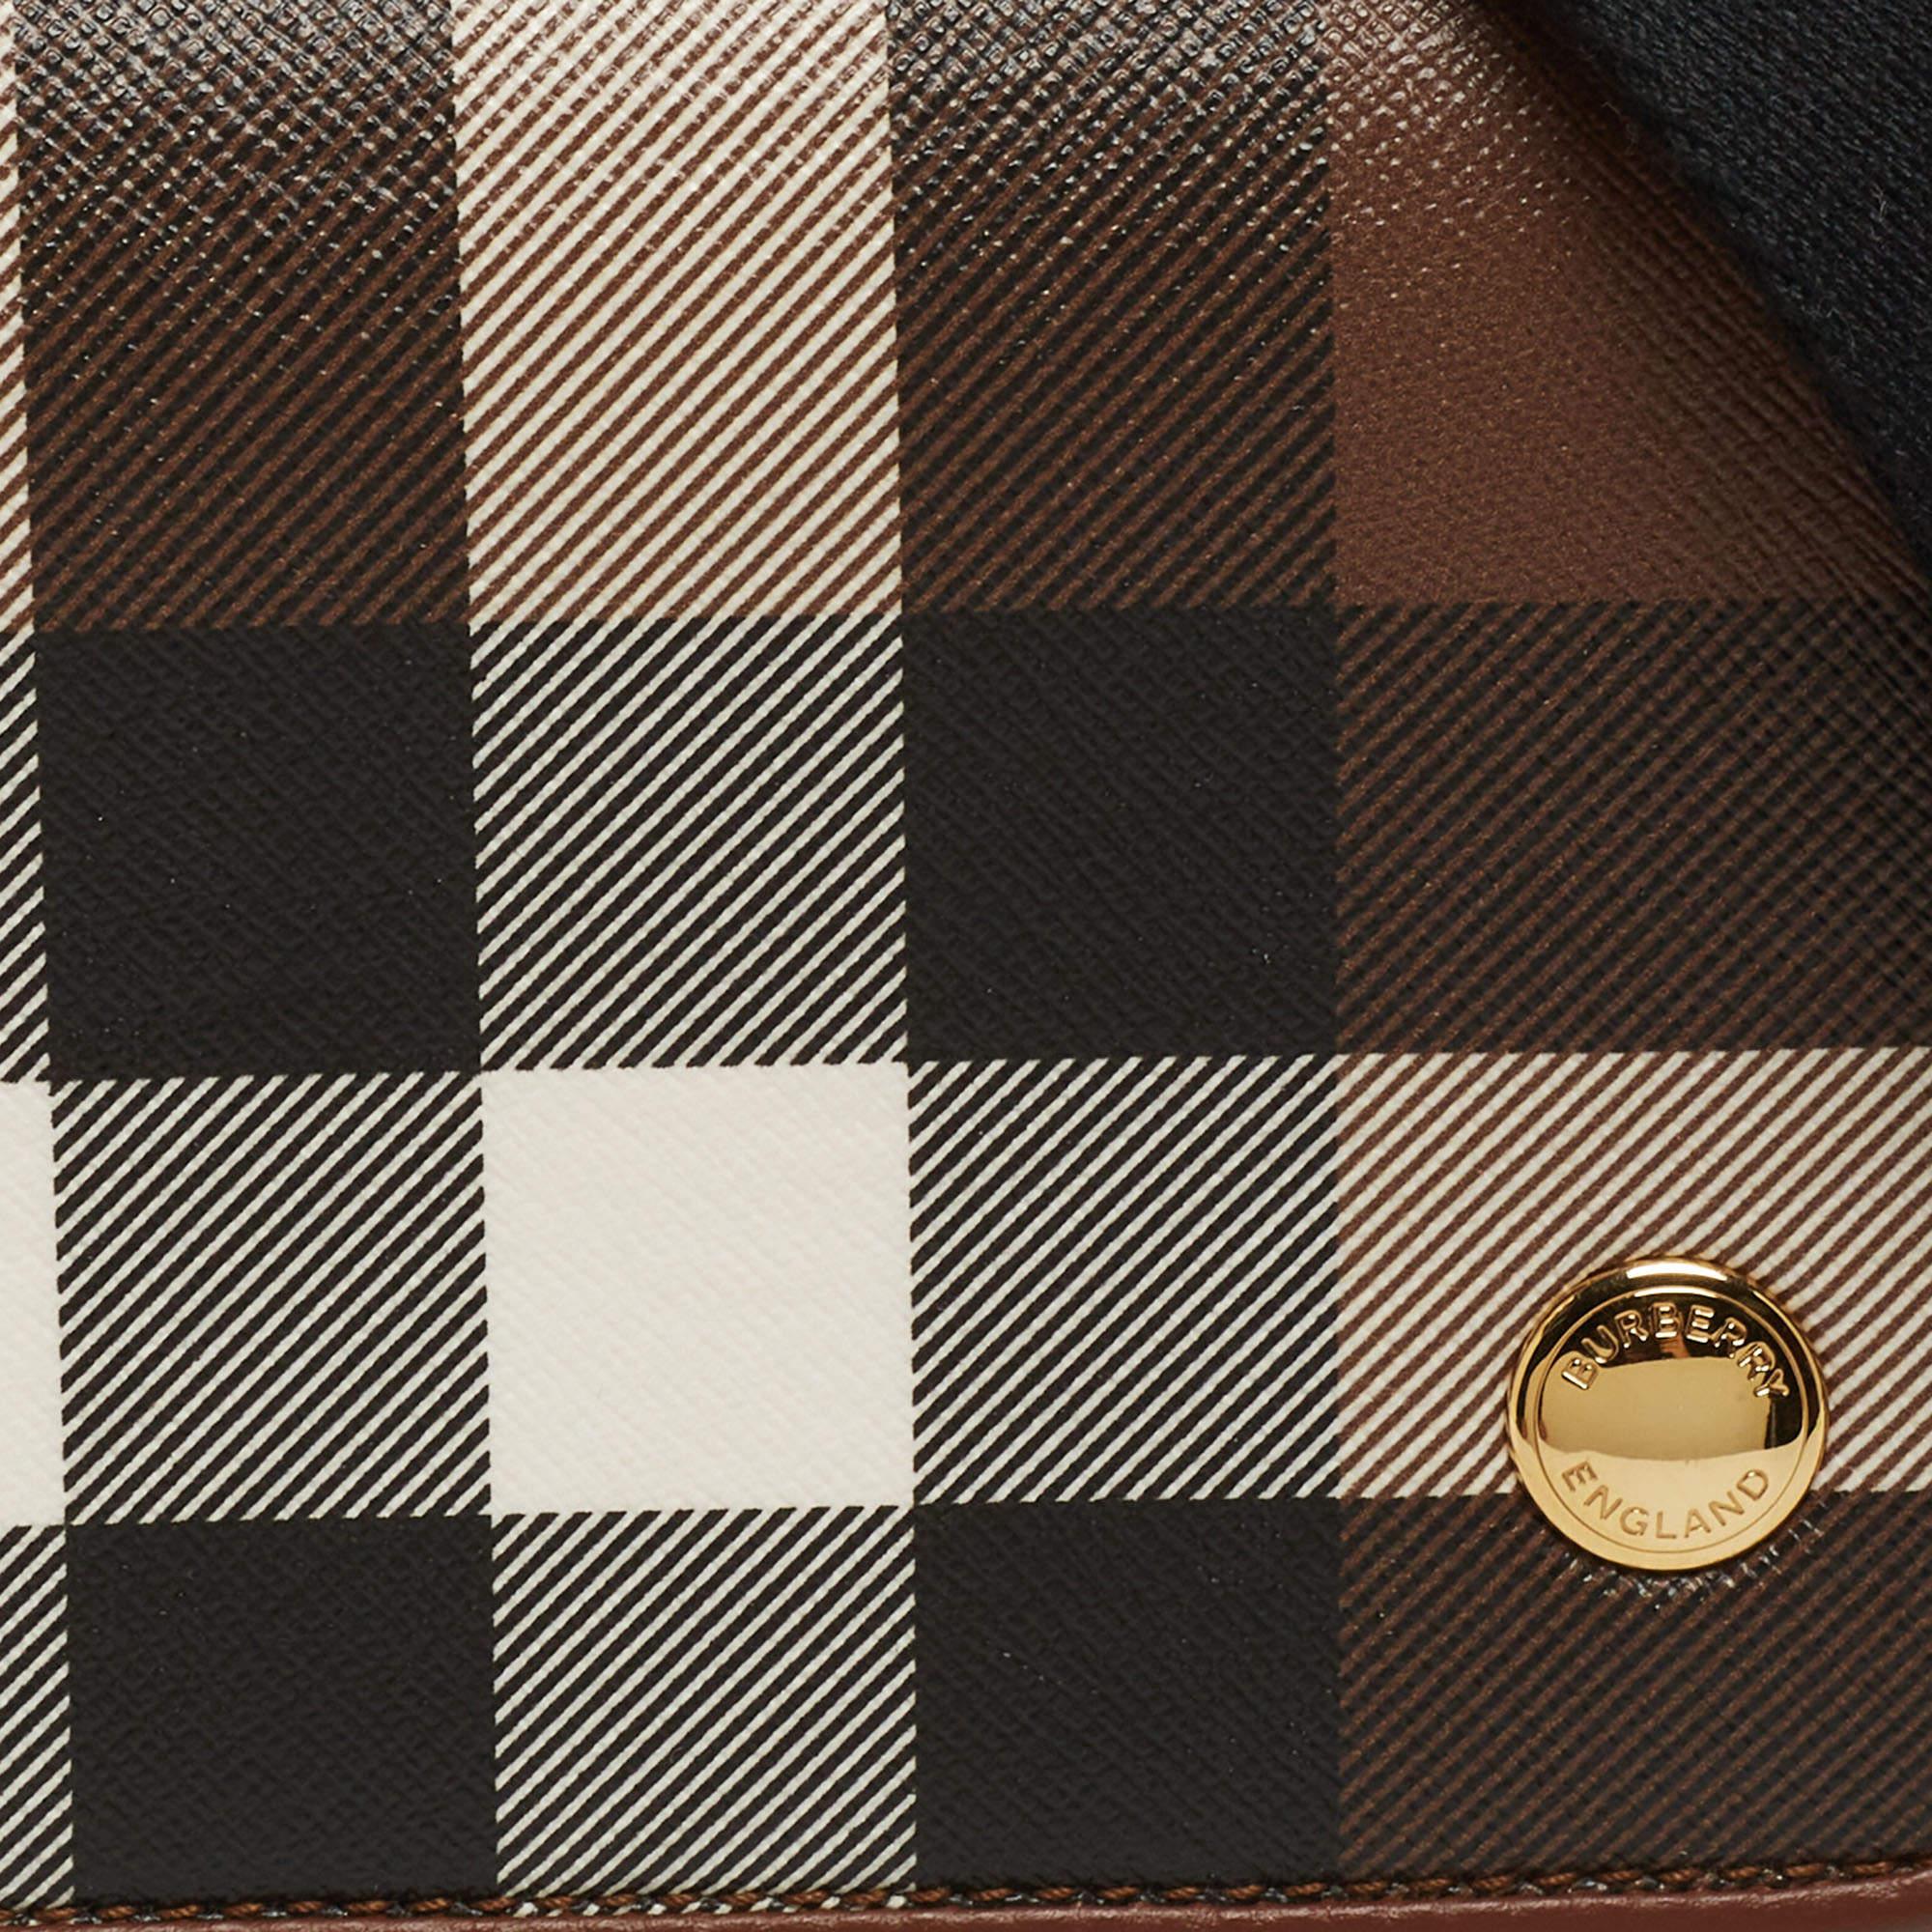 Burberry Brown/Black Check Coated Canvas and Leather Dorset Shoulder Bag 2